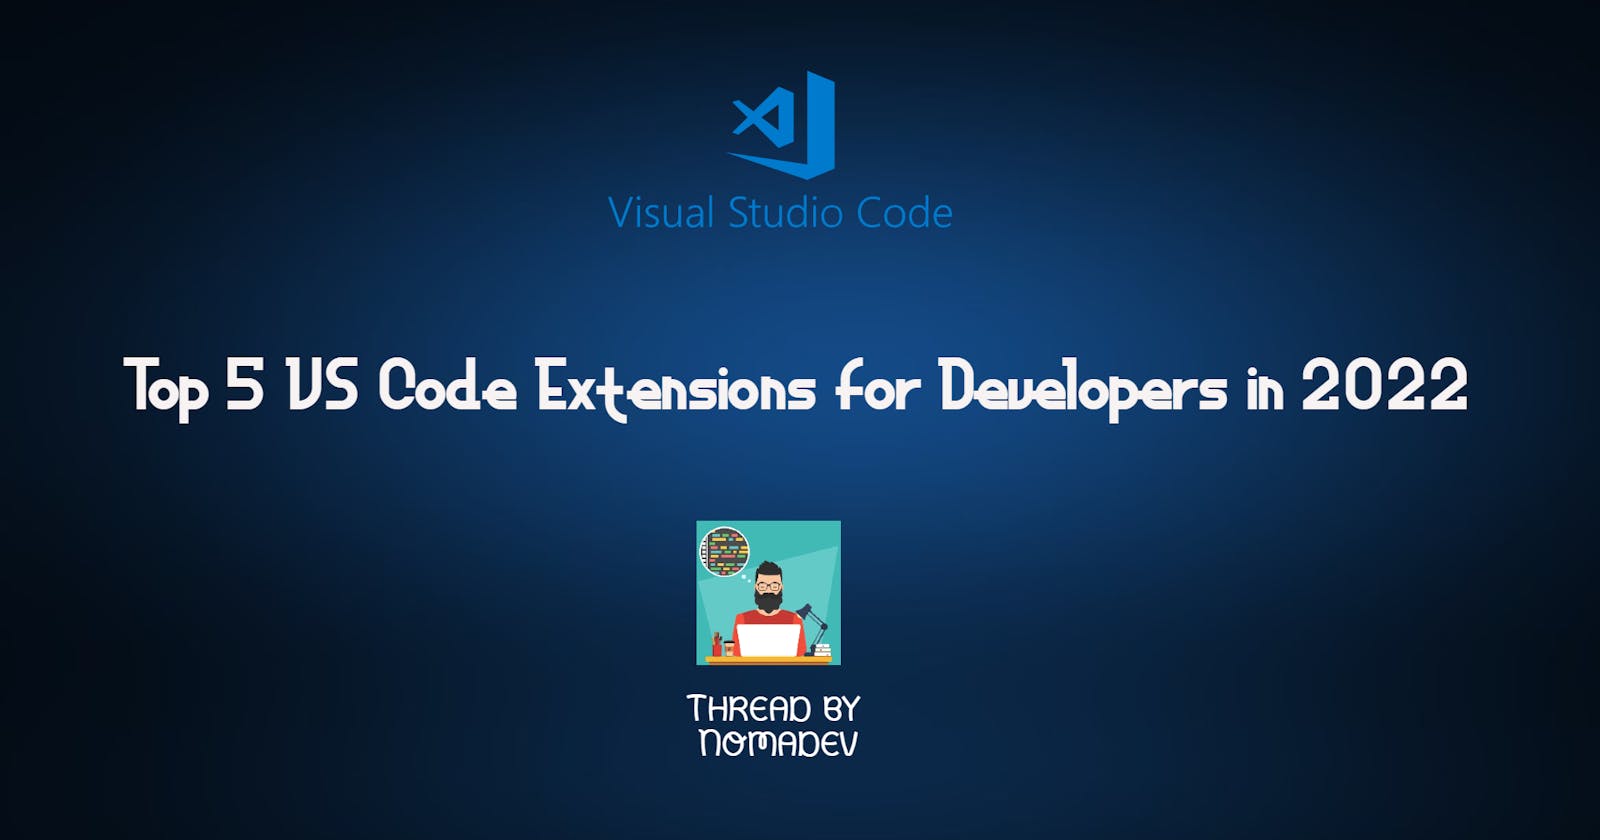 Top 5 VS Code Extensions for Developers in 2022